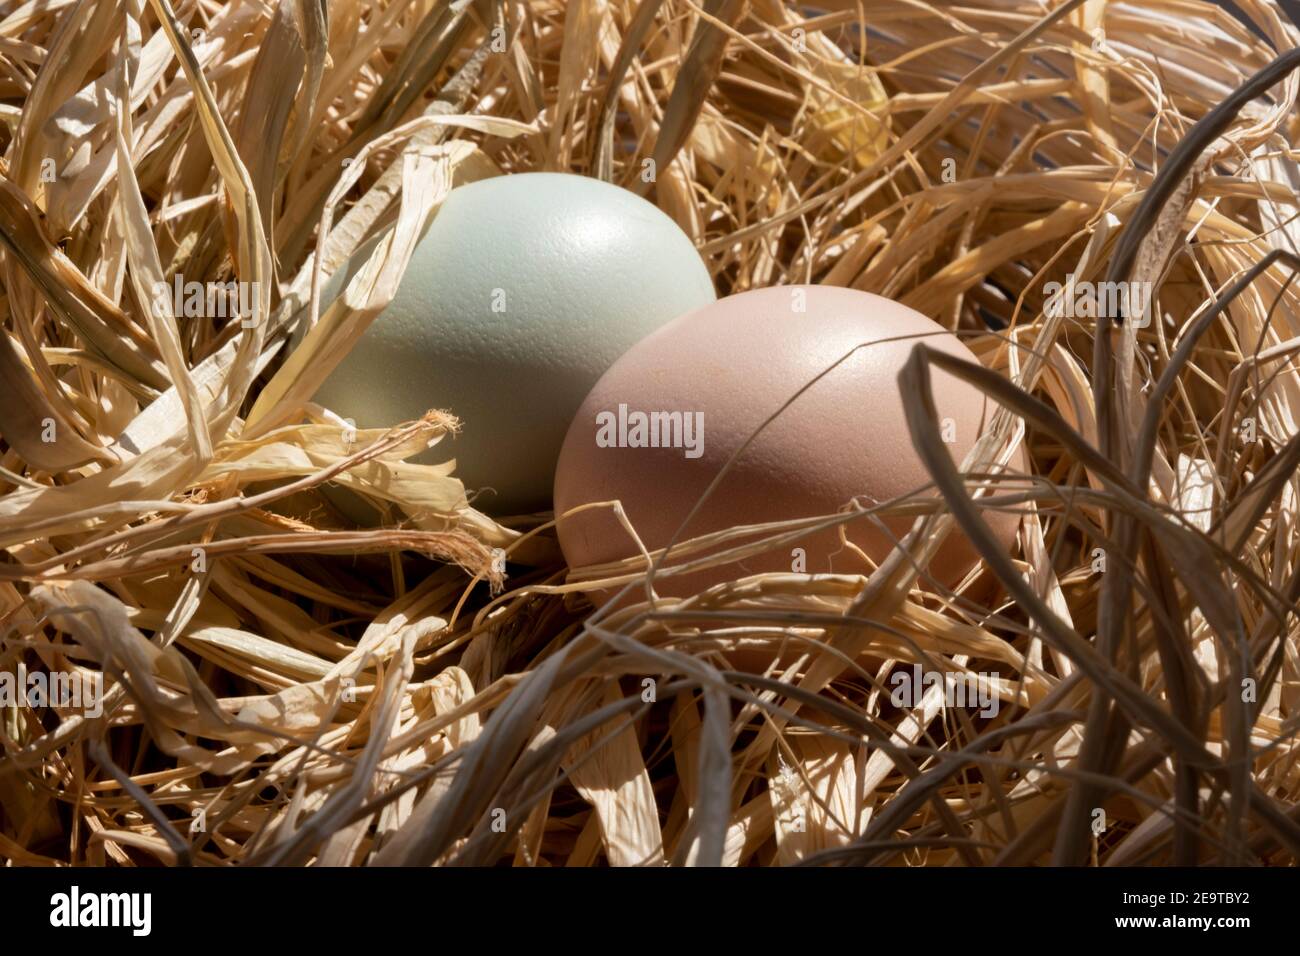 Organic Easter concept: Close up on two natural colored eggs lying on straw. Sun light reflecting on shell surface. Brown and greenish chicken egg Stock Photo